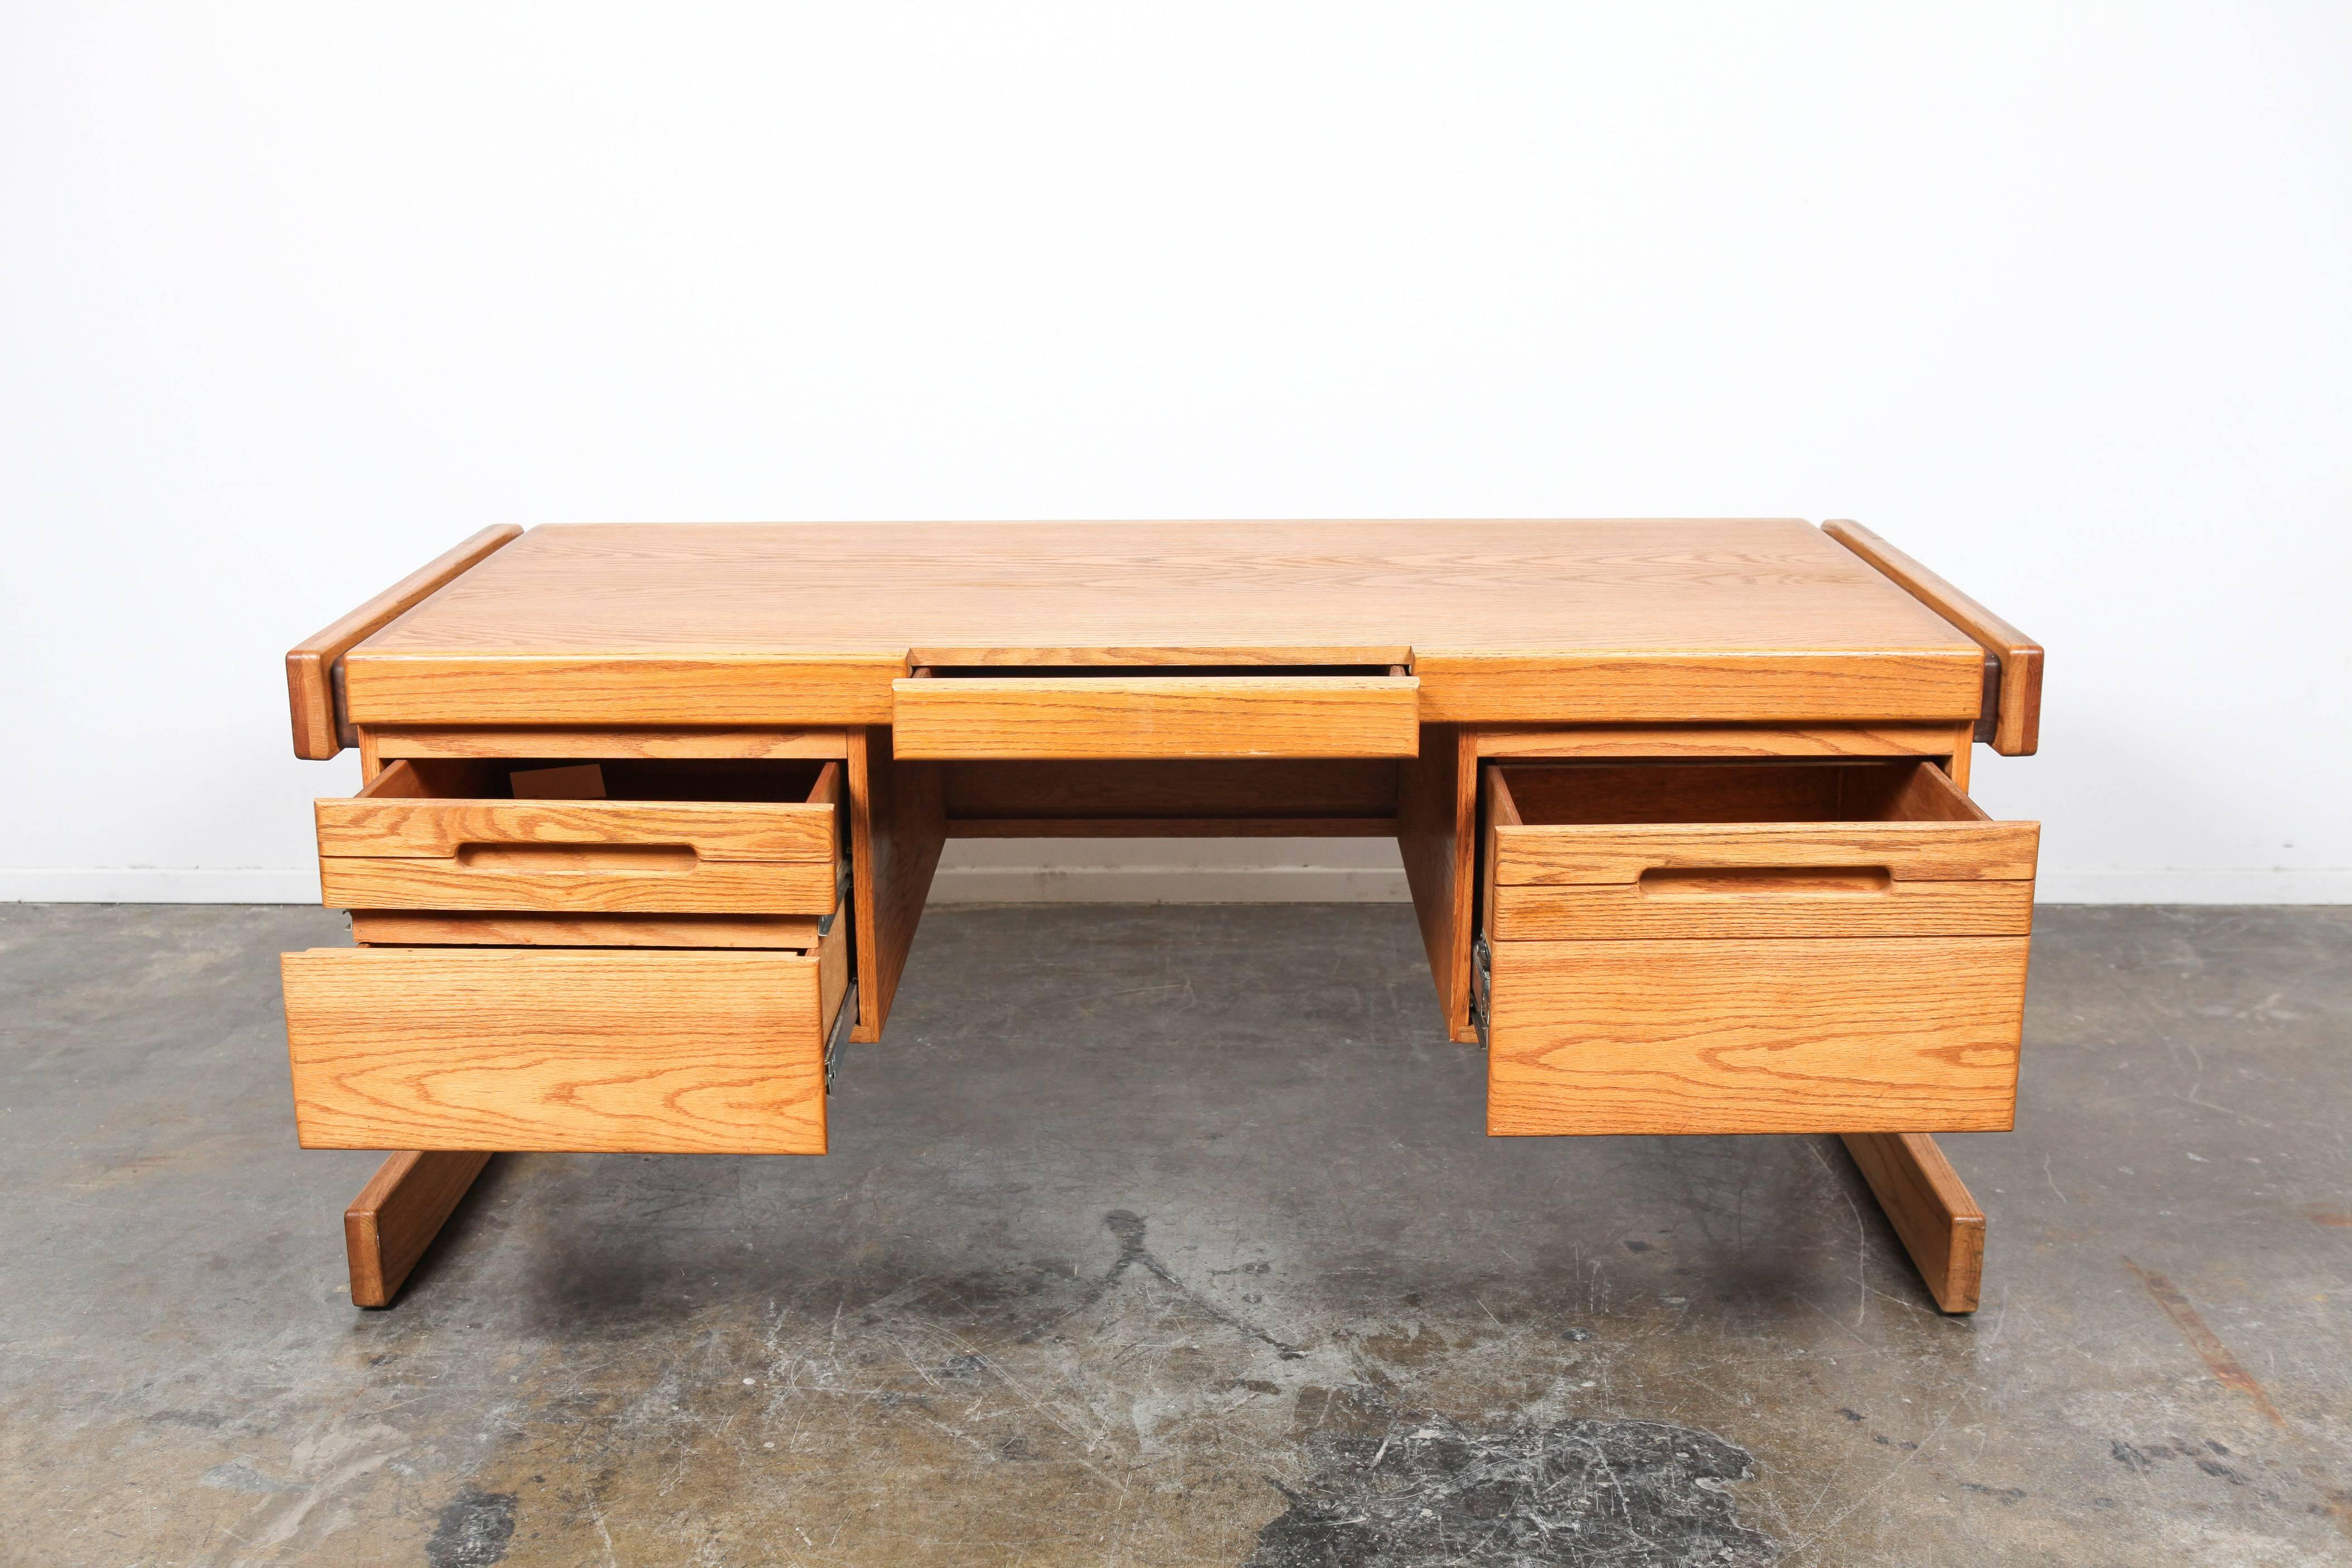 Oak Mid-Century Modern desk designed by American Mid-Century designer Lou Hodges. This piece has a total of five drawers and rests on a U shaped cantilever base.